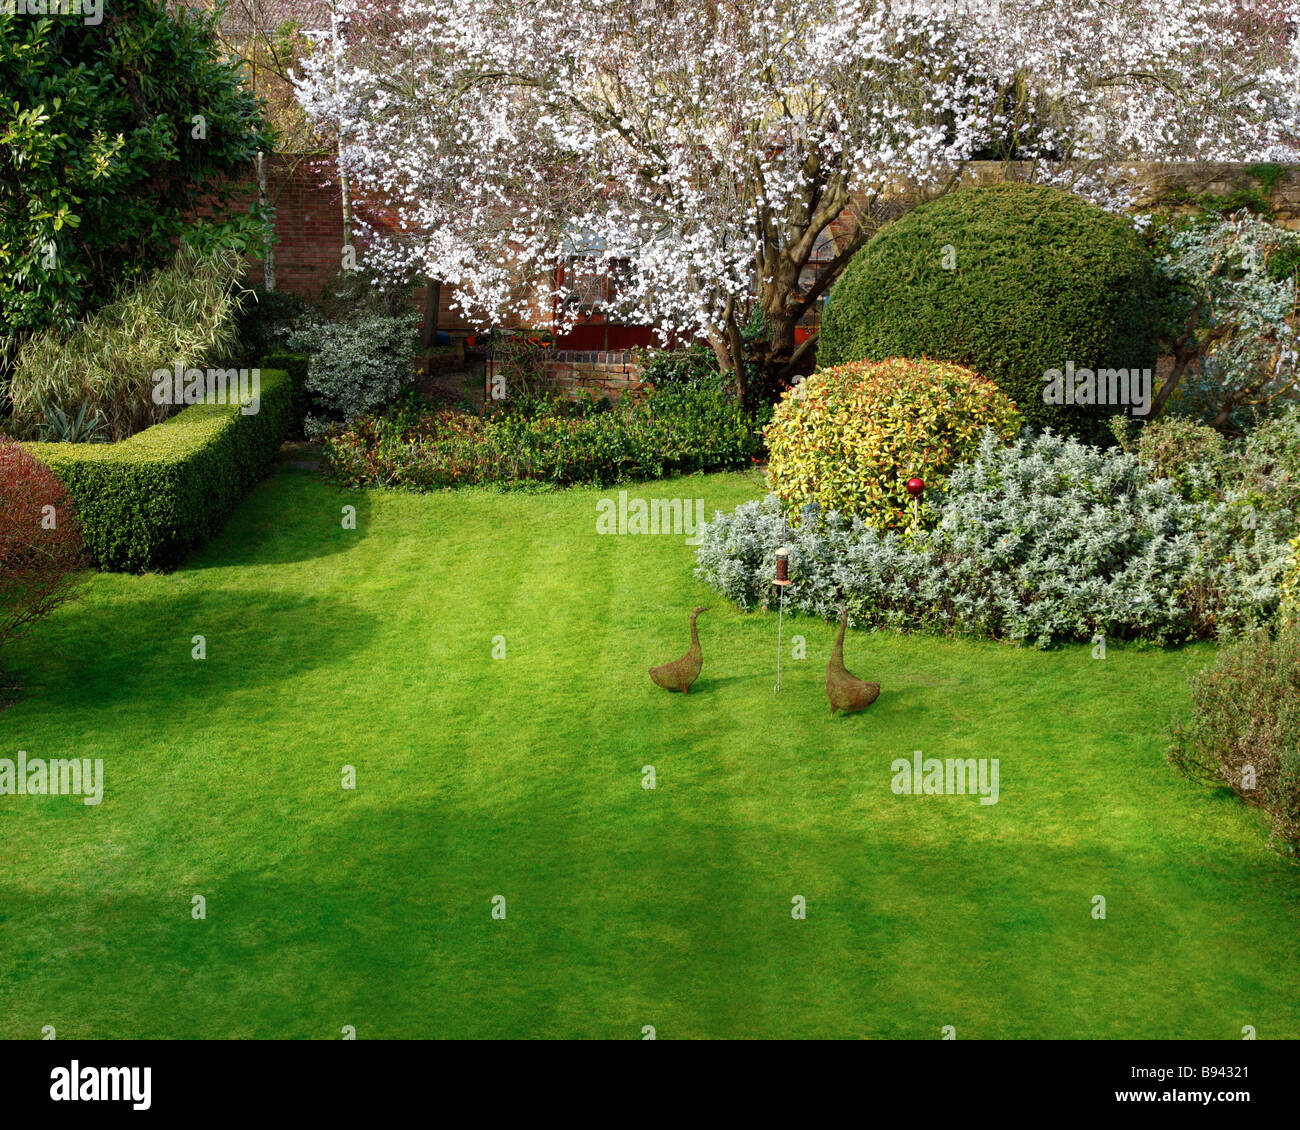 GB - GLOUCESTERSHIRE: Typical English Garden in Spring Stock Photo